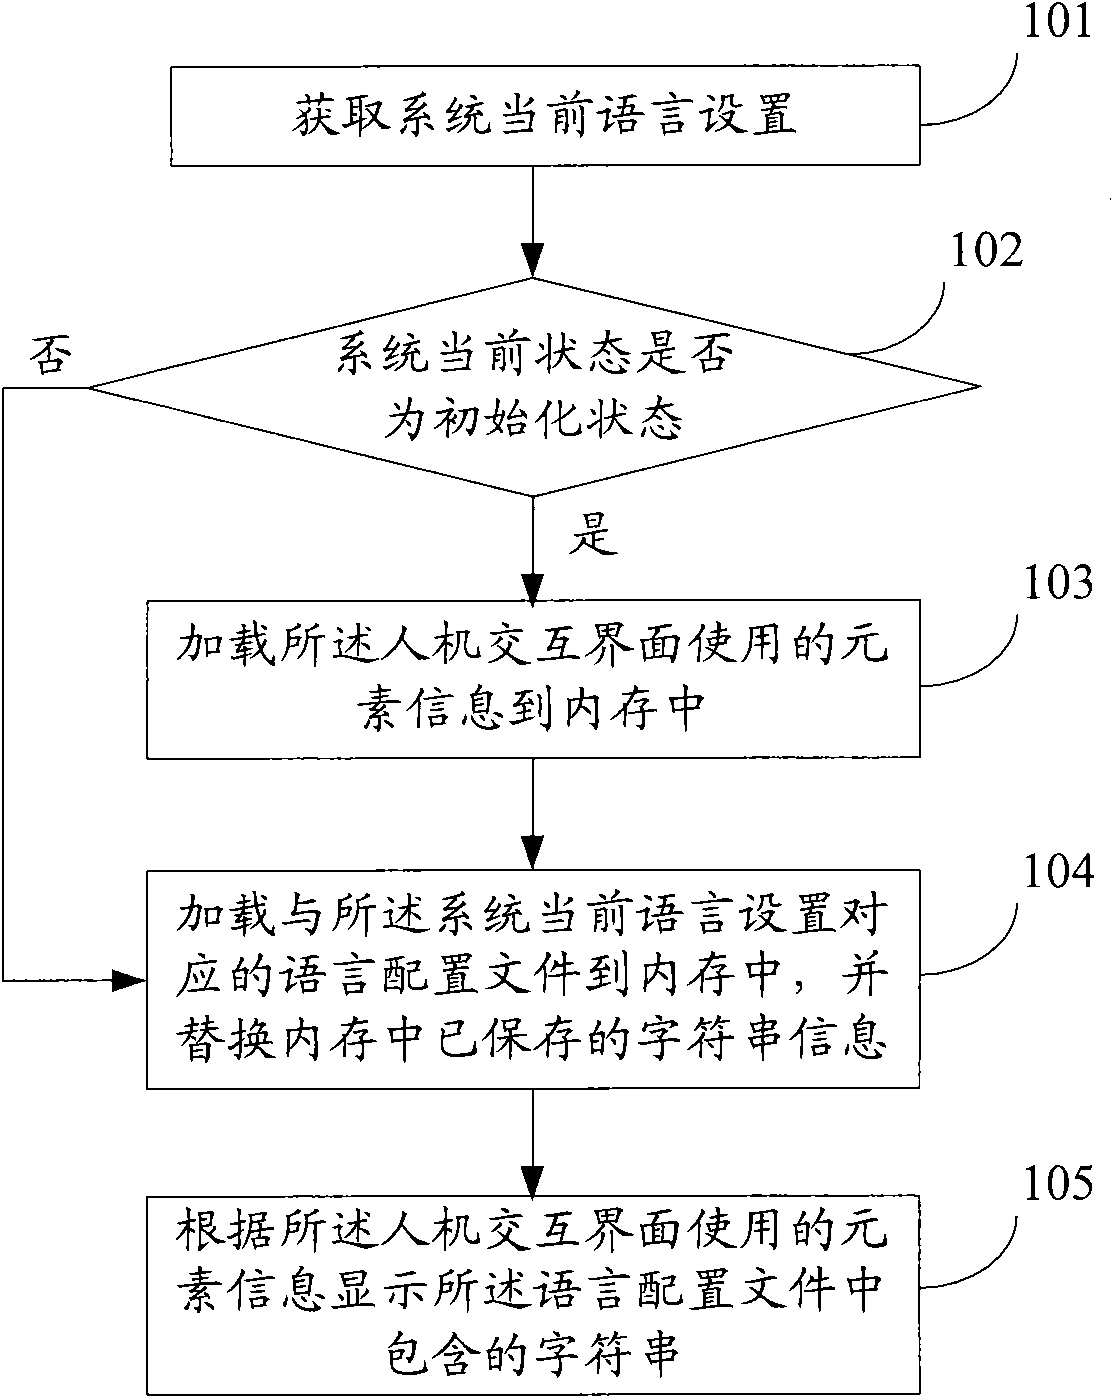 Multi-language implementation method and device of human-computer interaction interface